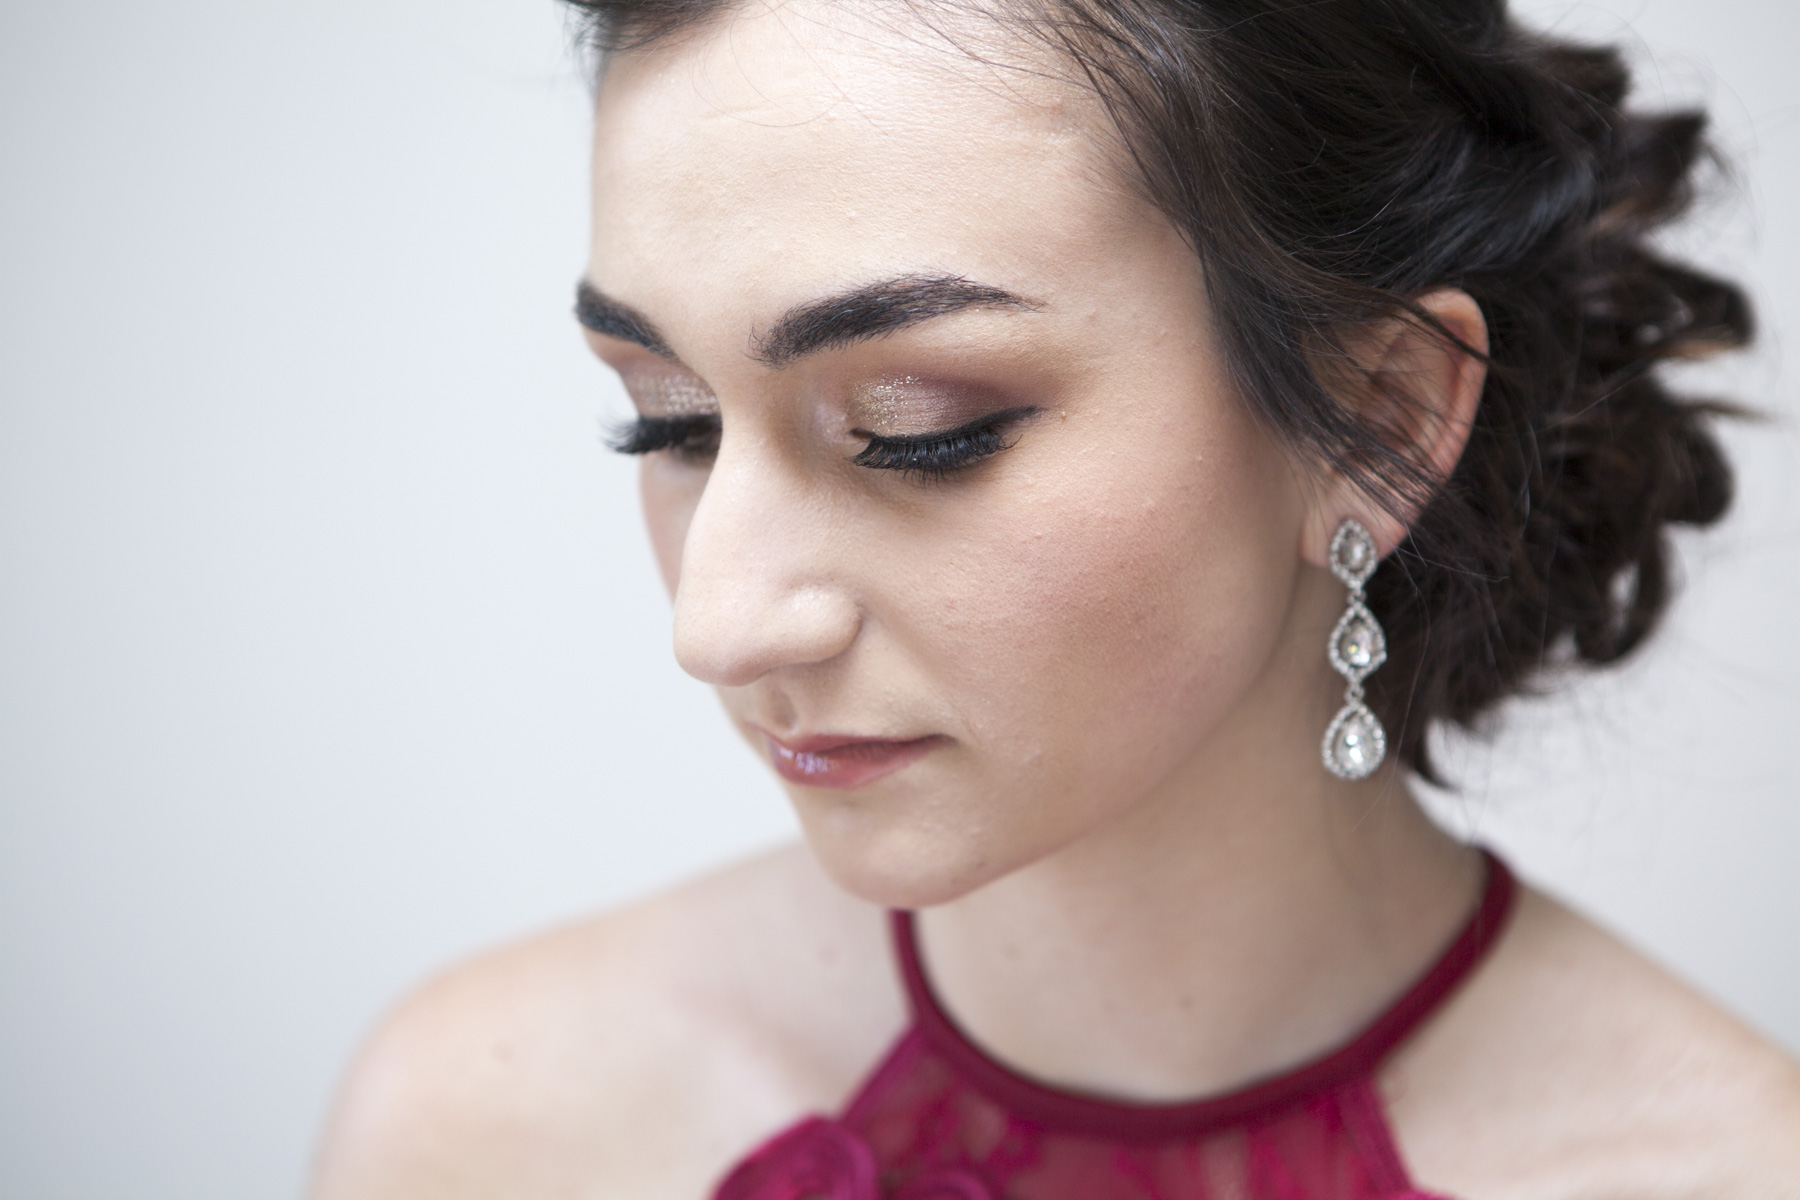 Bridal Makeup Artist, Airbrushing for Weddings in Essex, Suffolk and  Hertfordshire by Victoria Taylor - Prom Makeup & Hair